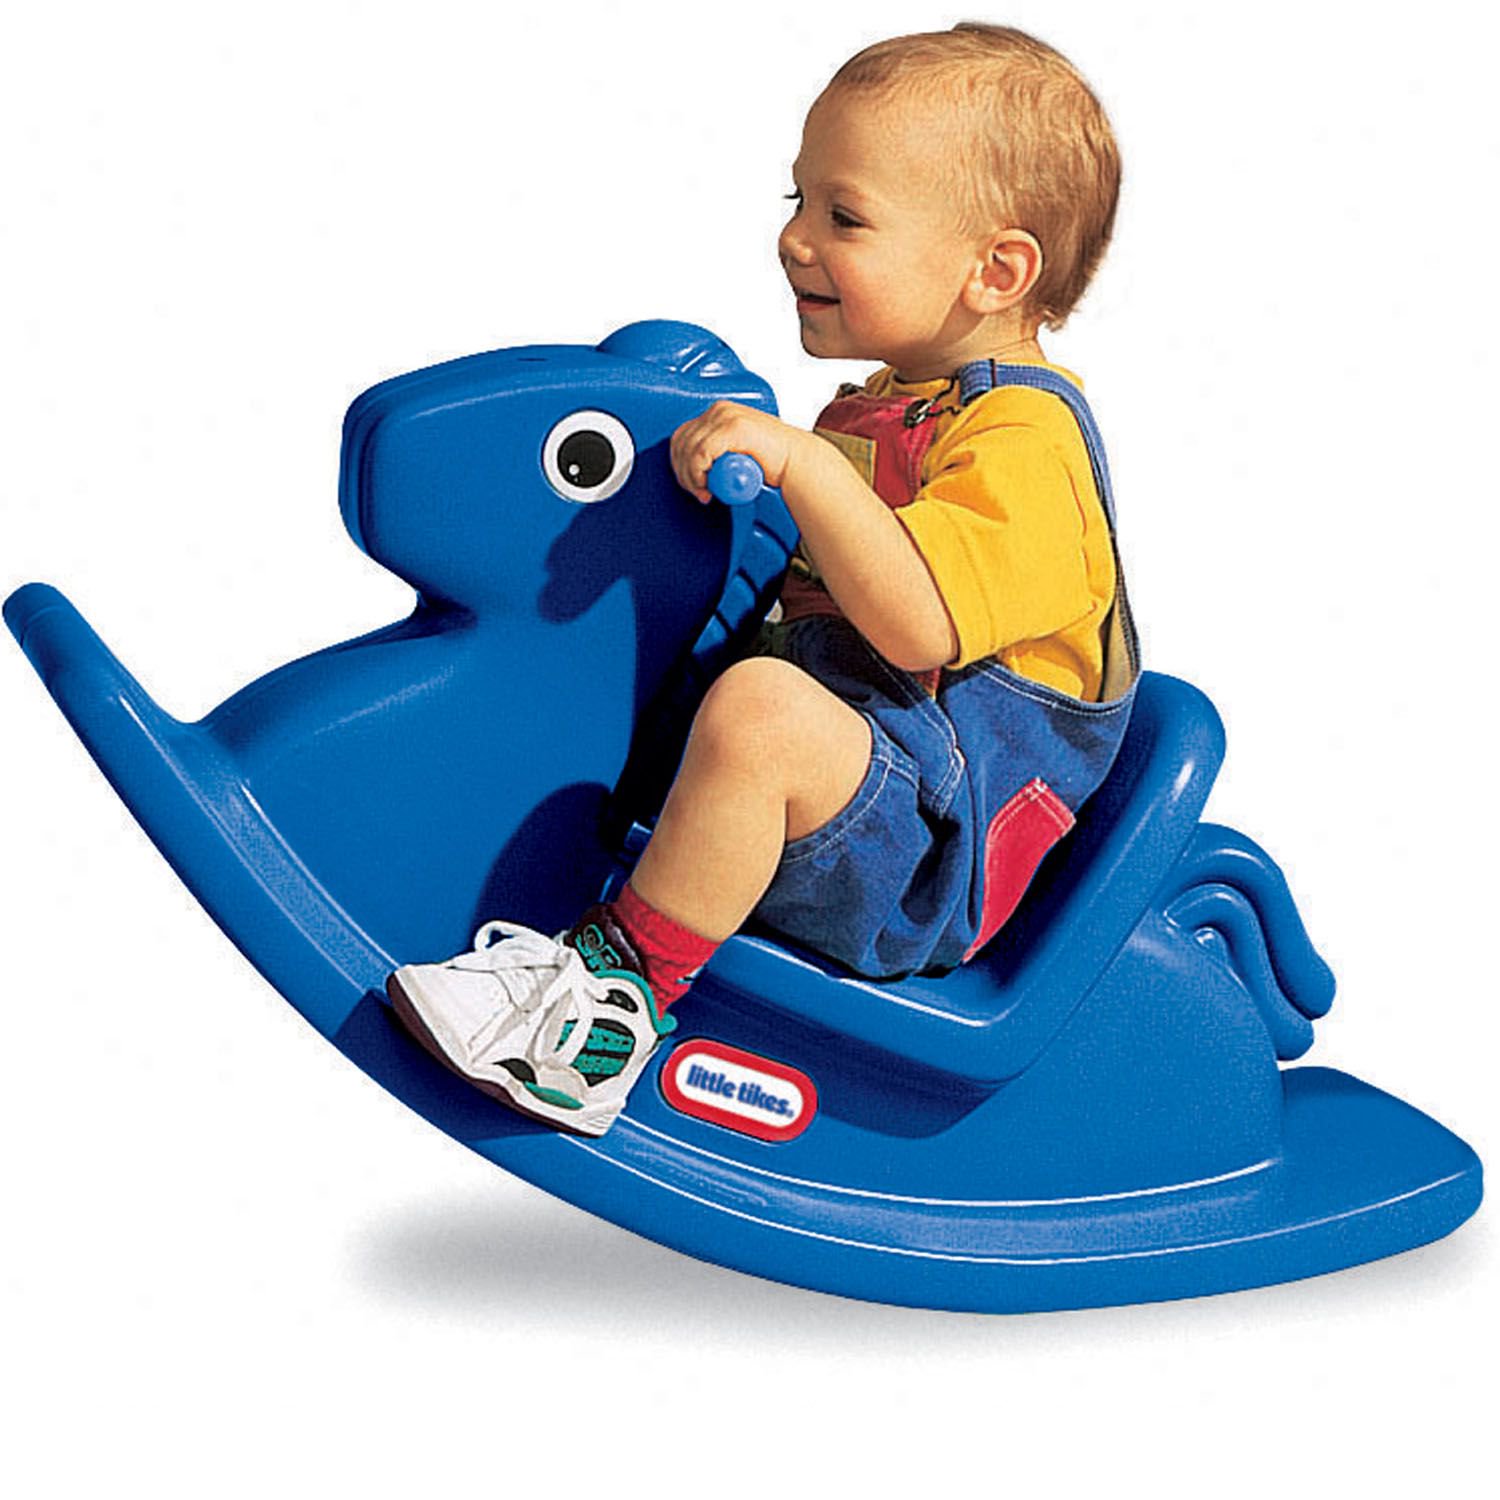 Little Tikes Outdoor & Indoor Balance Rocking Horse Toddlers, Girls Boys, Blue - image 1 of 5